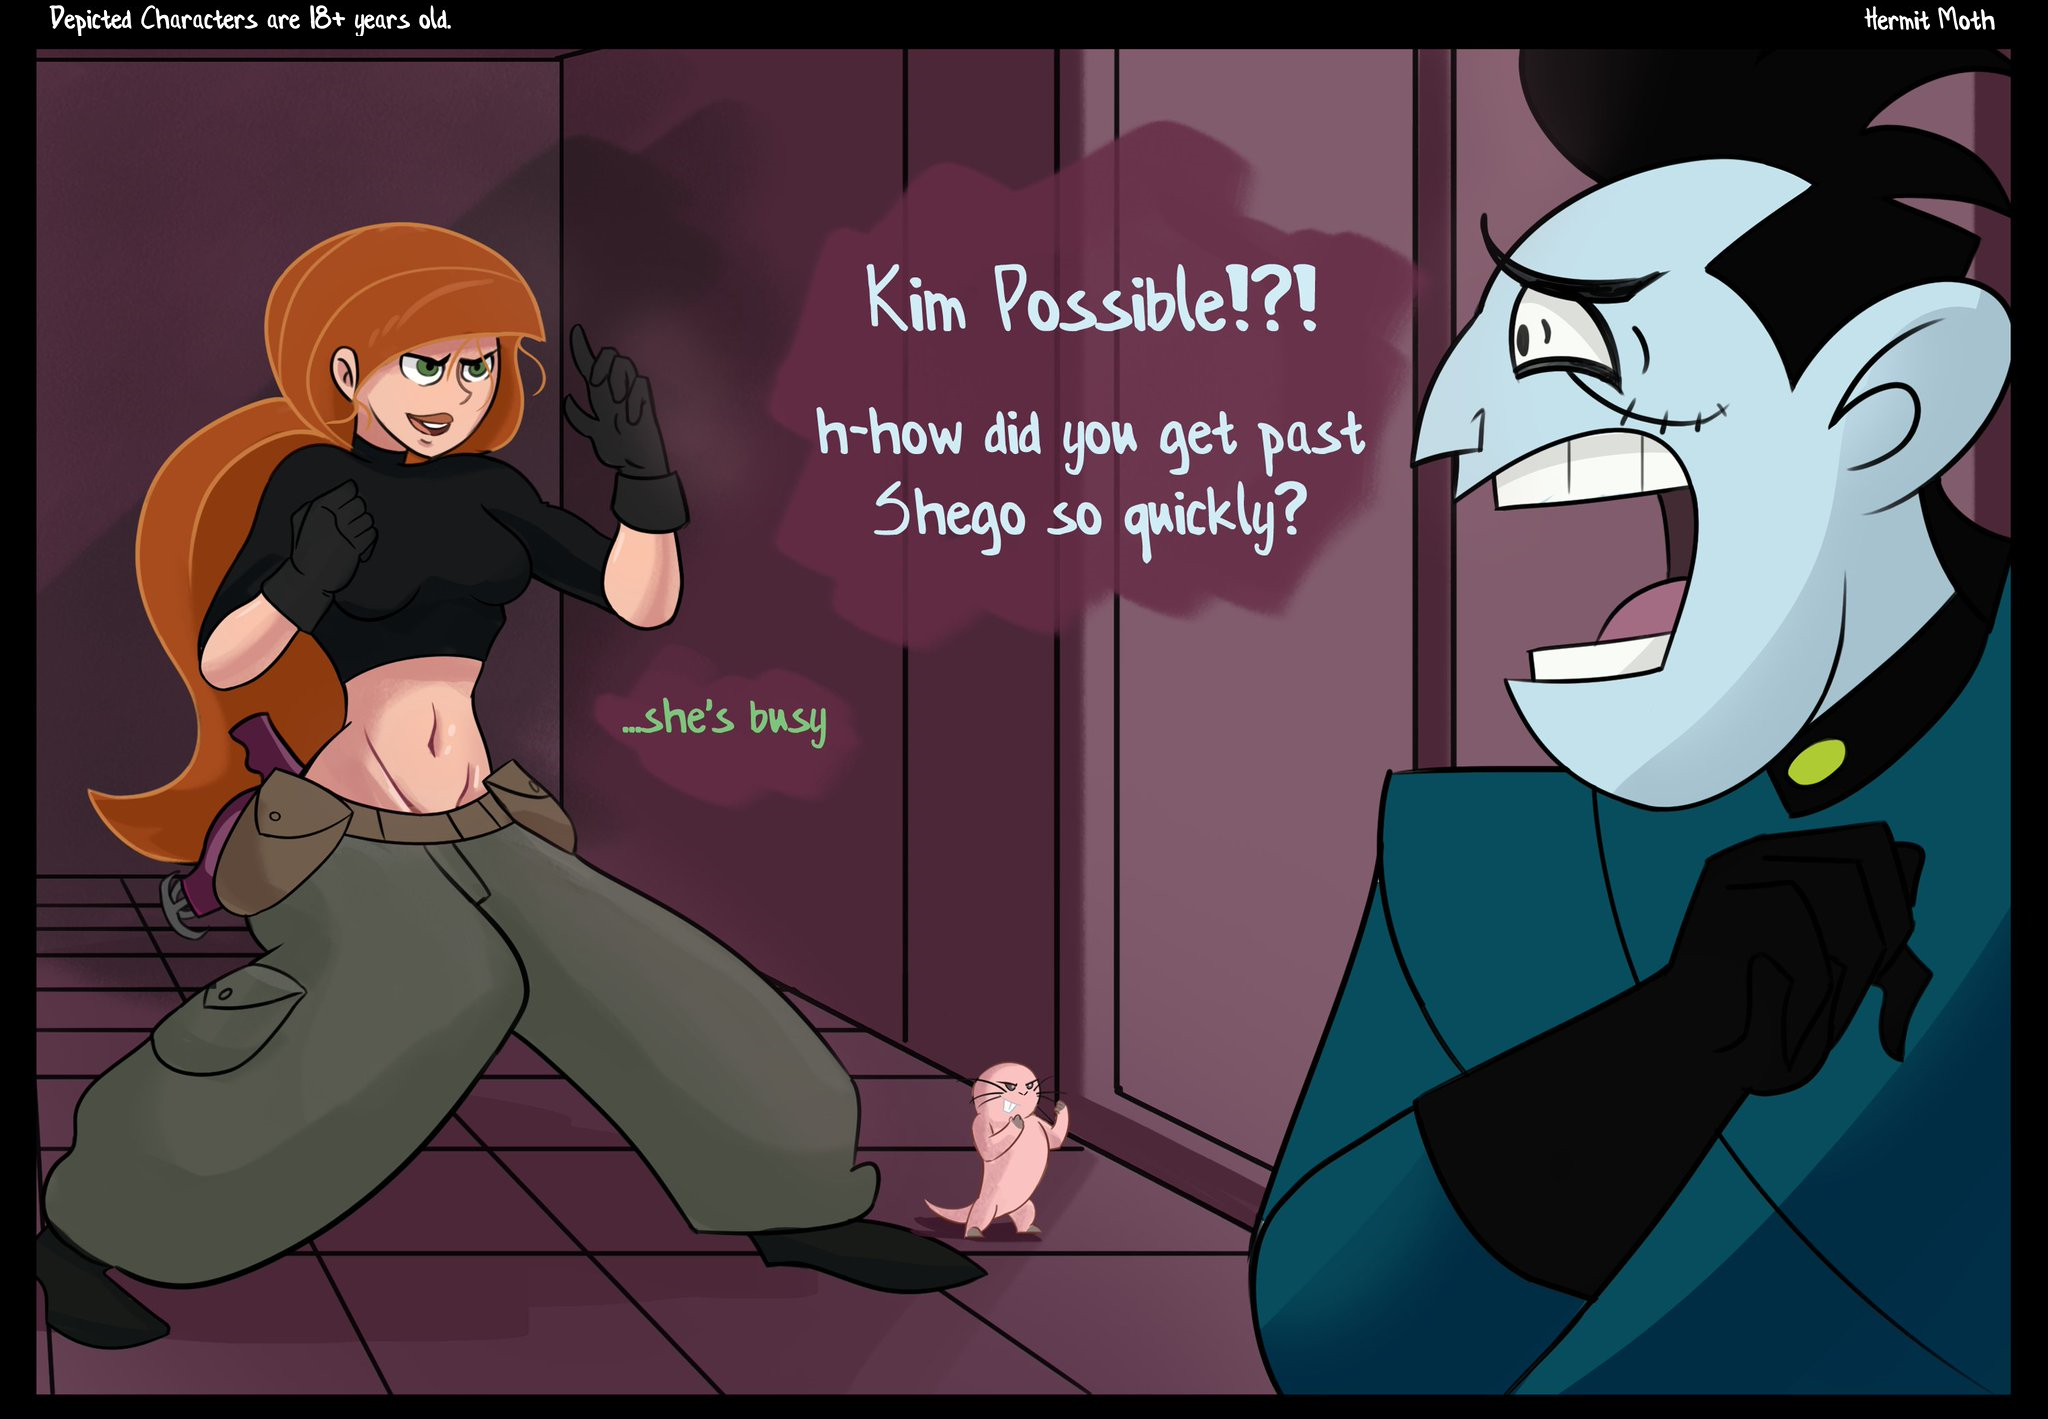 Shego’s Distraction